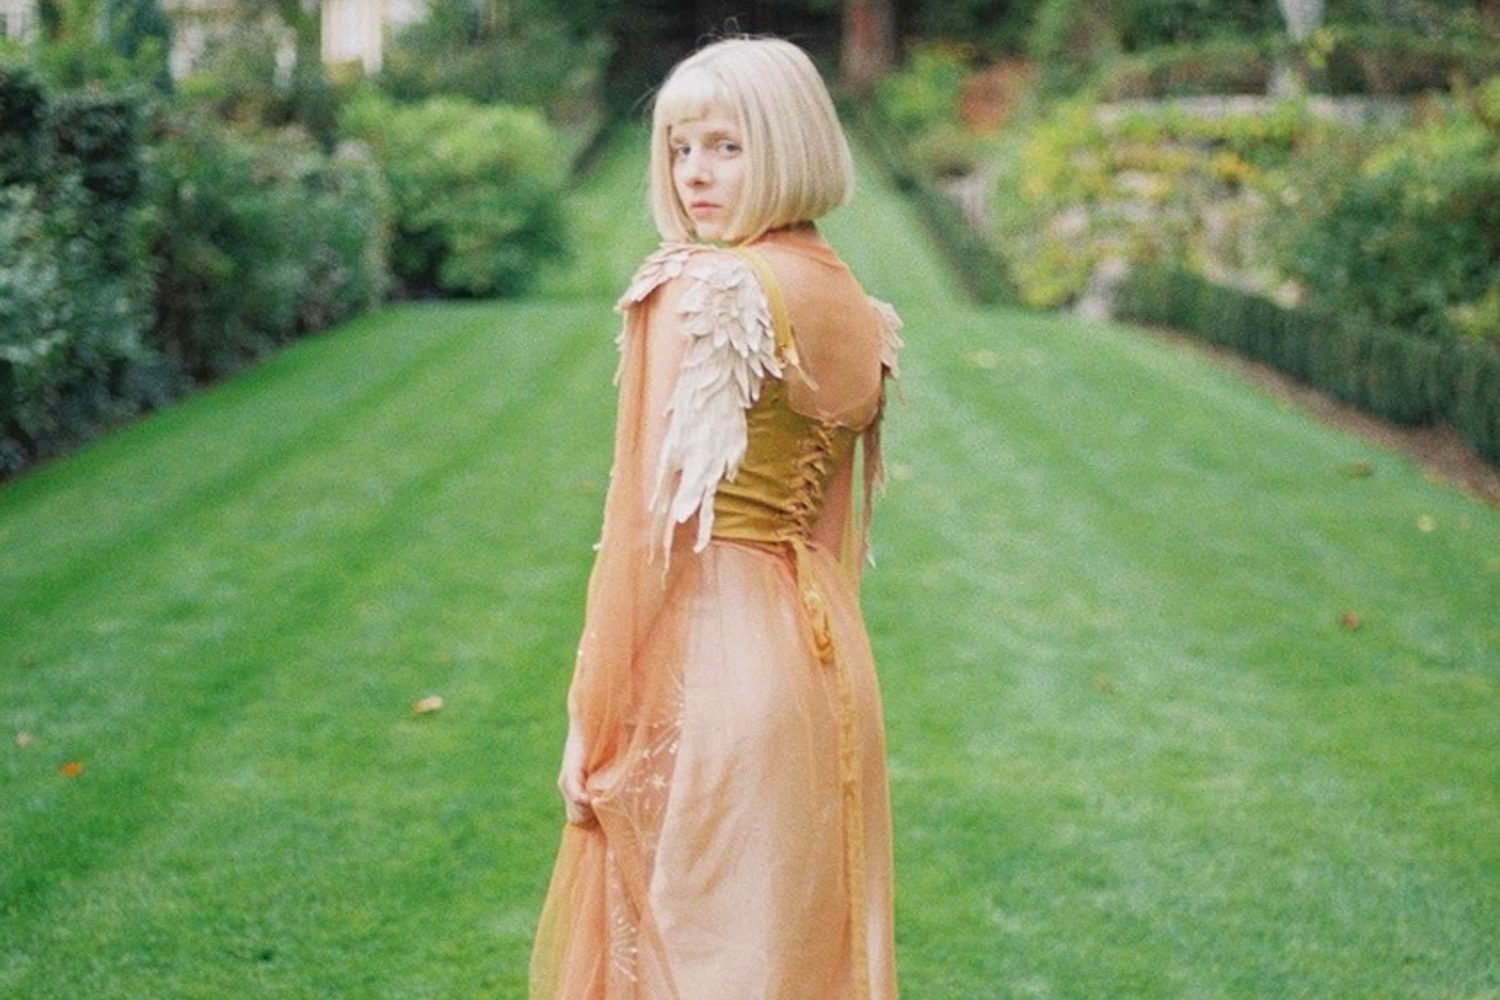 Aurora releases 'Giving In To The Love' video